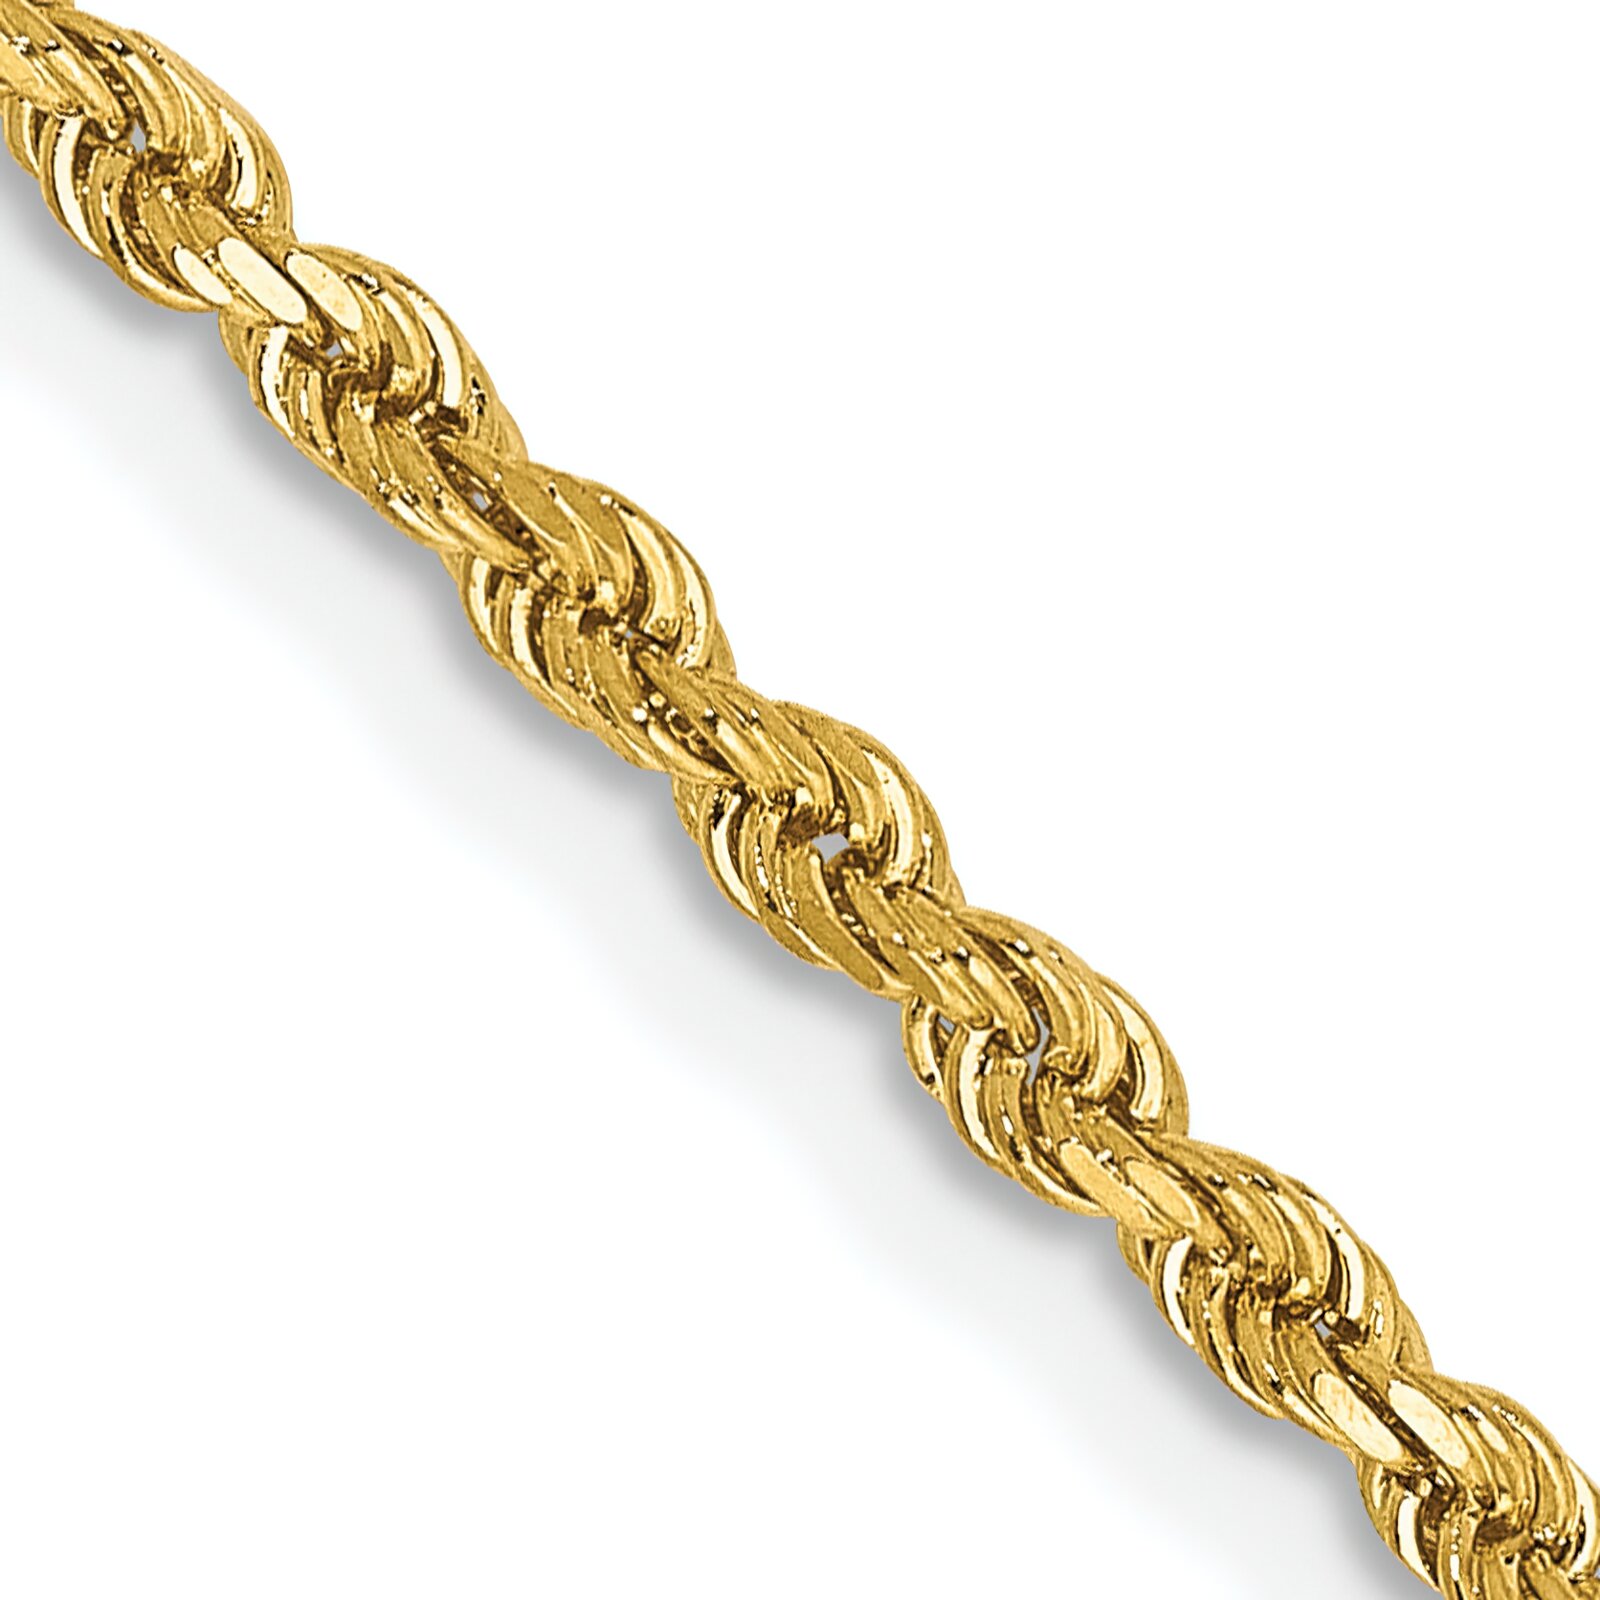 Findingking 14K Gold 2.25mm Rope Chain Jewelry 18" FindingKing